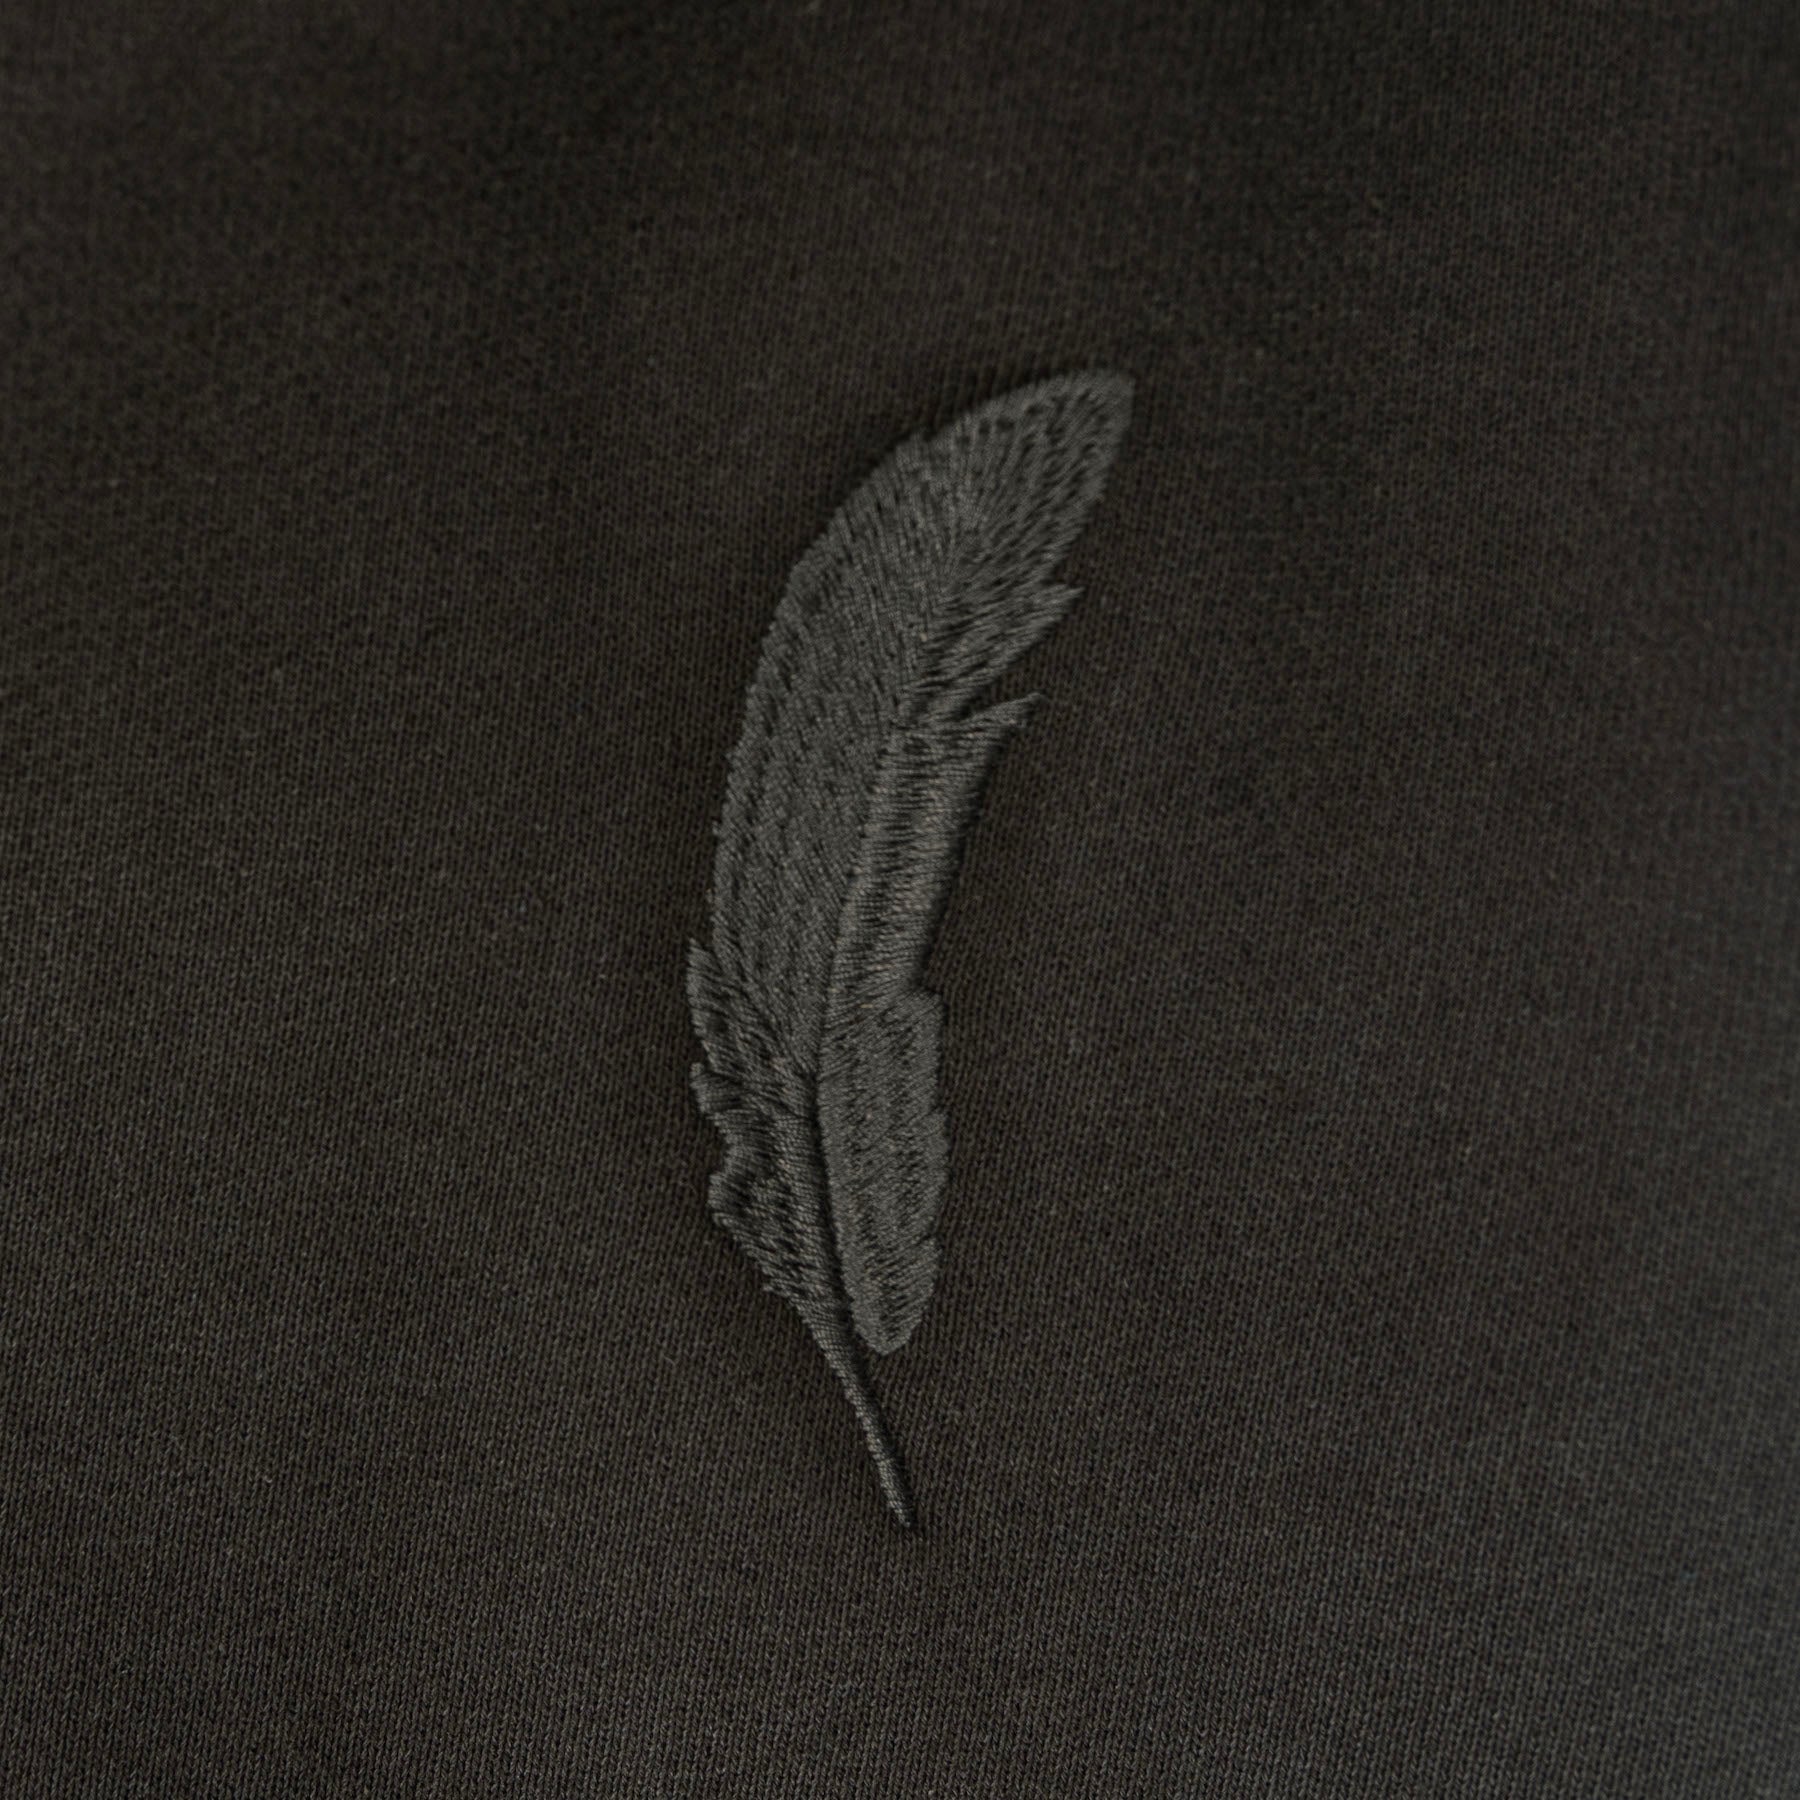 Premium Solid Sweatpant - Feather Embroidery